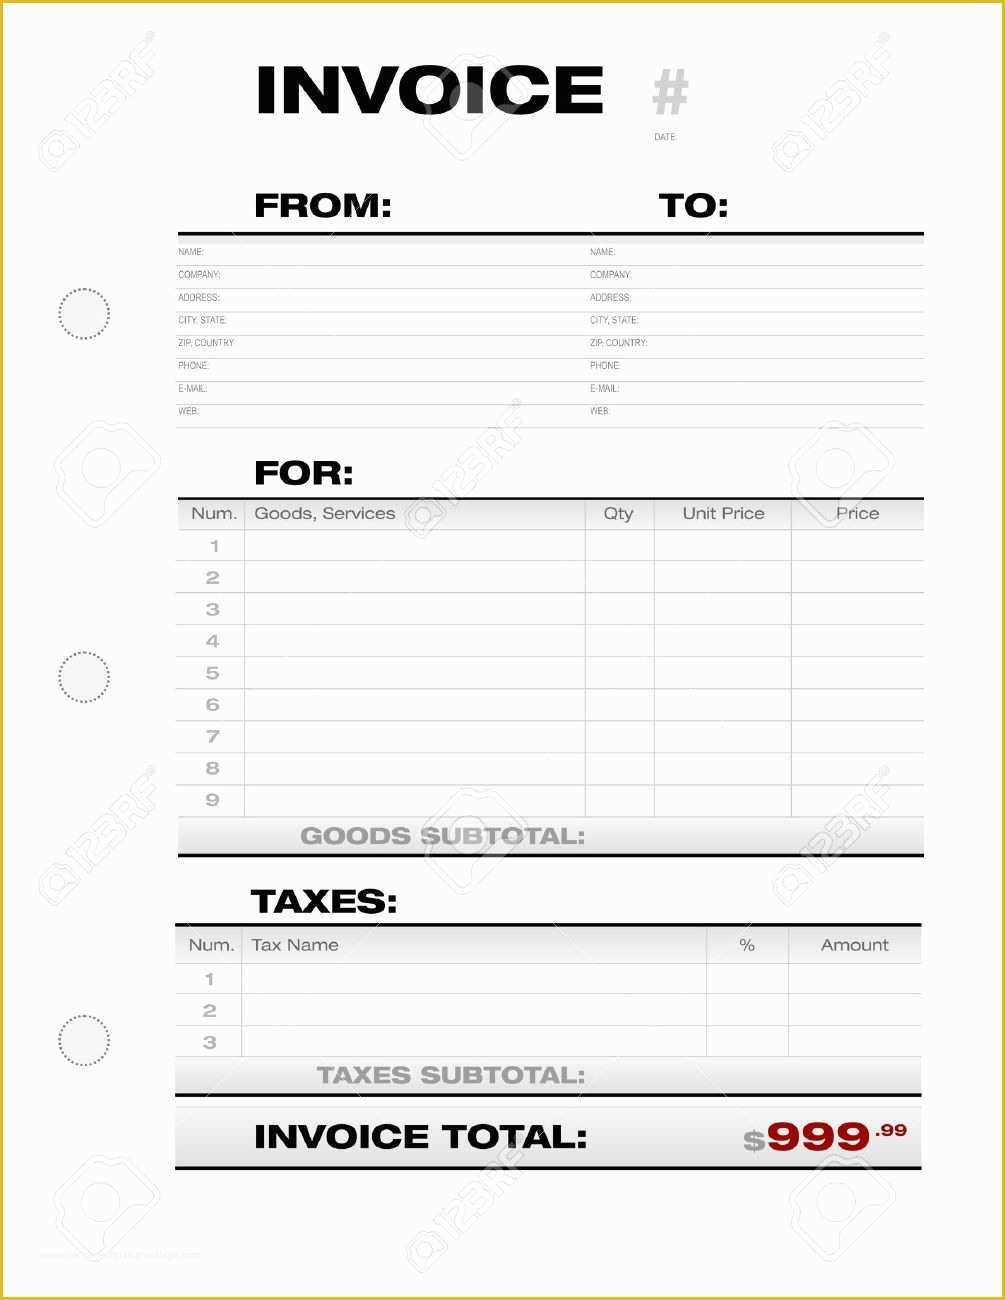 Basic Invoice Template Free Of Invoice Document Template